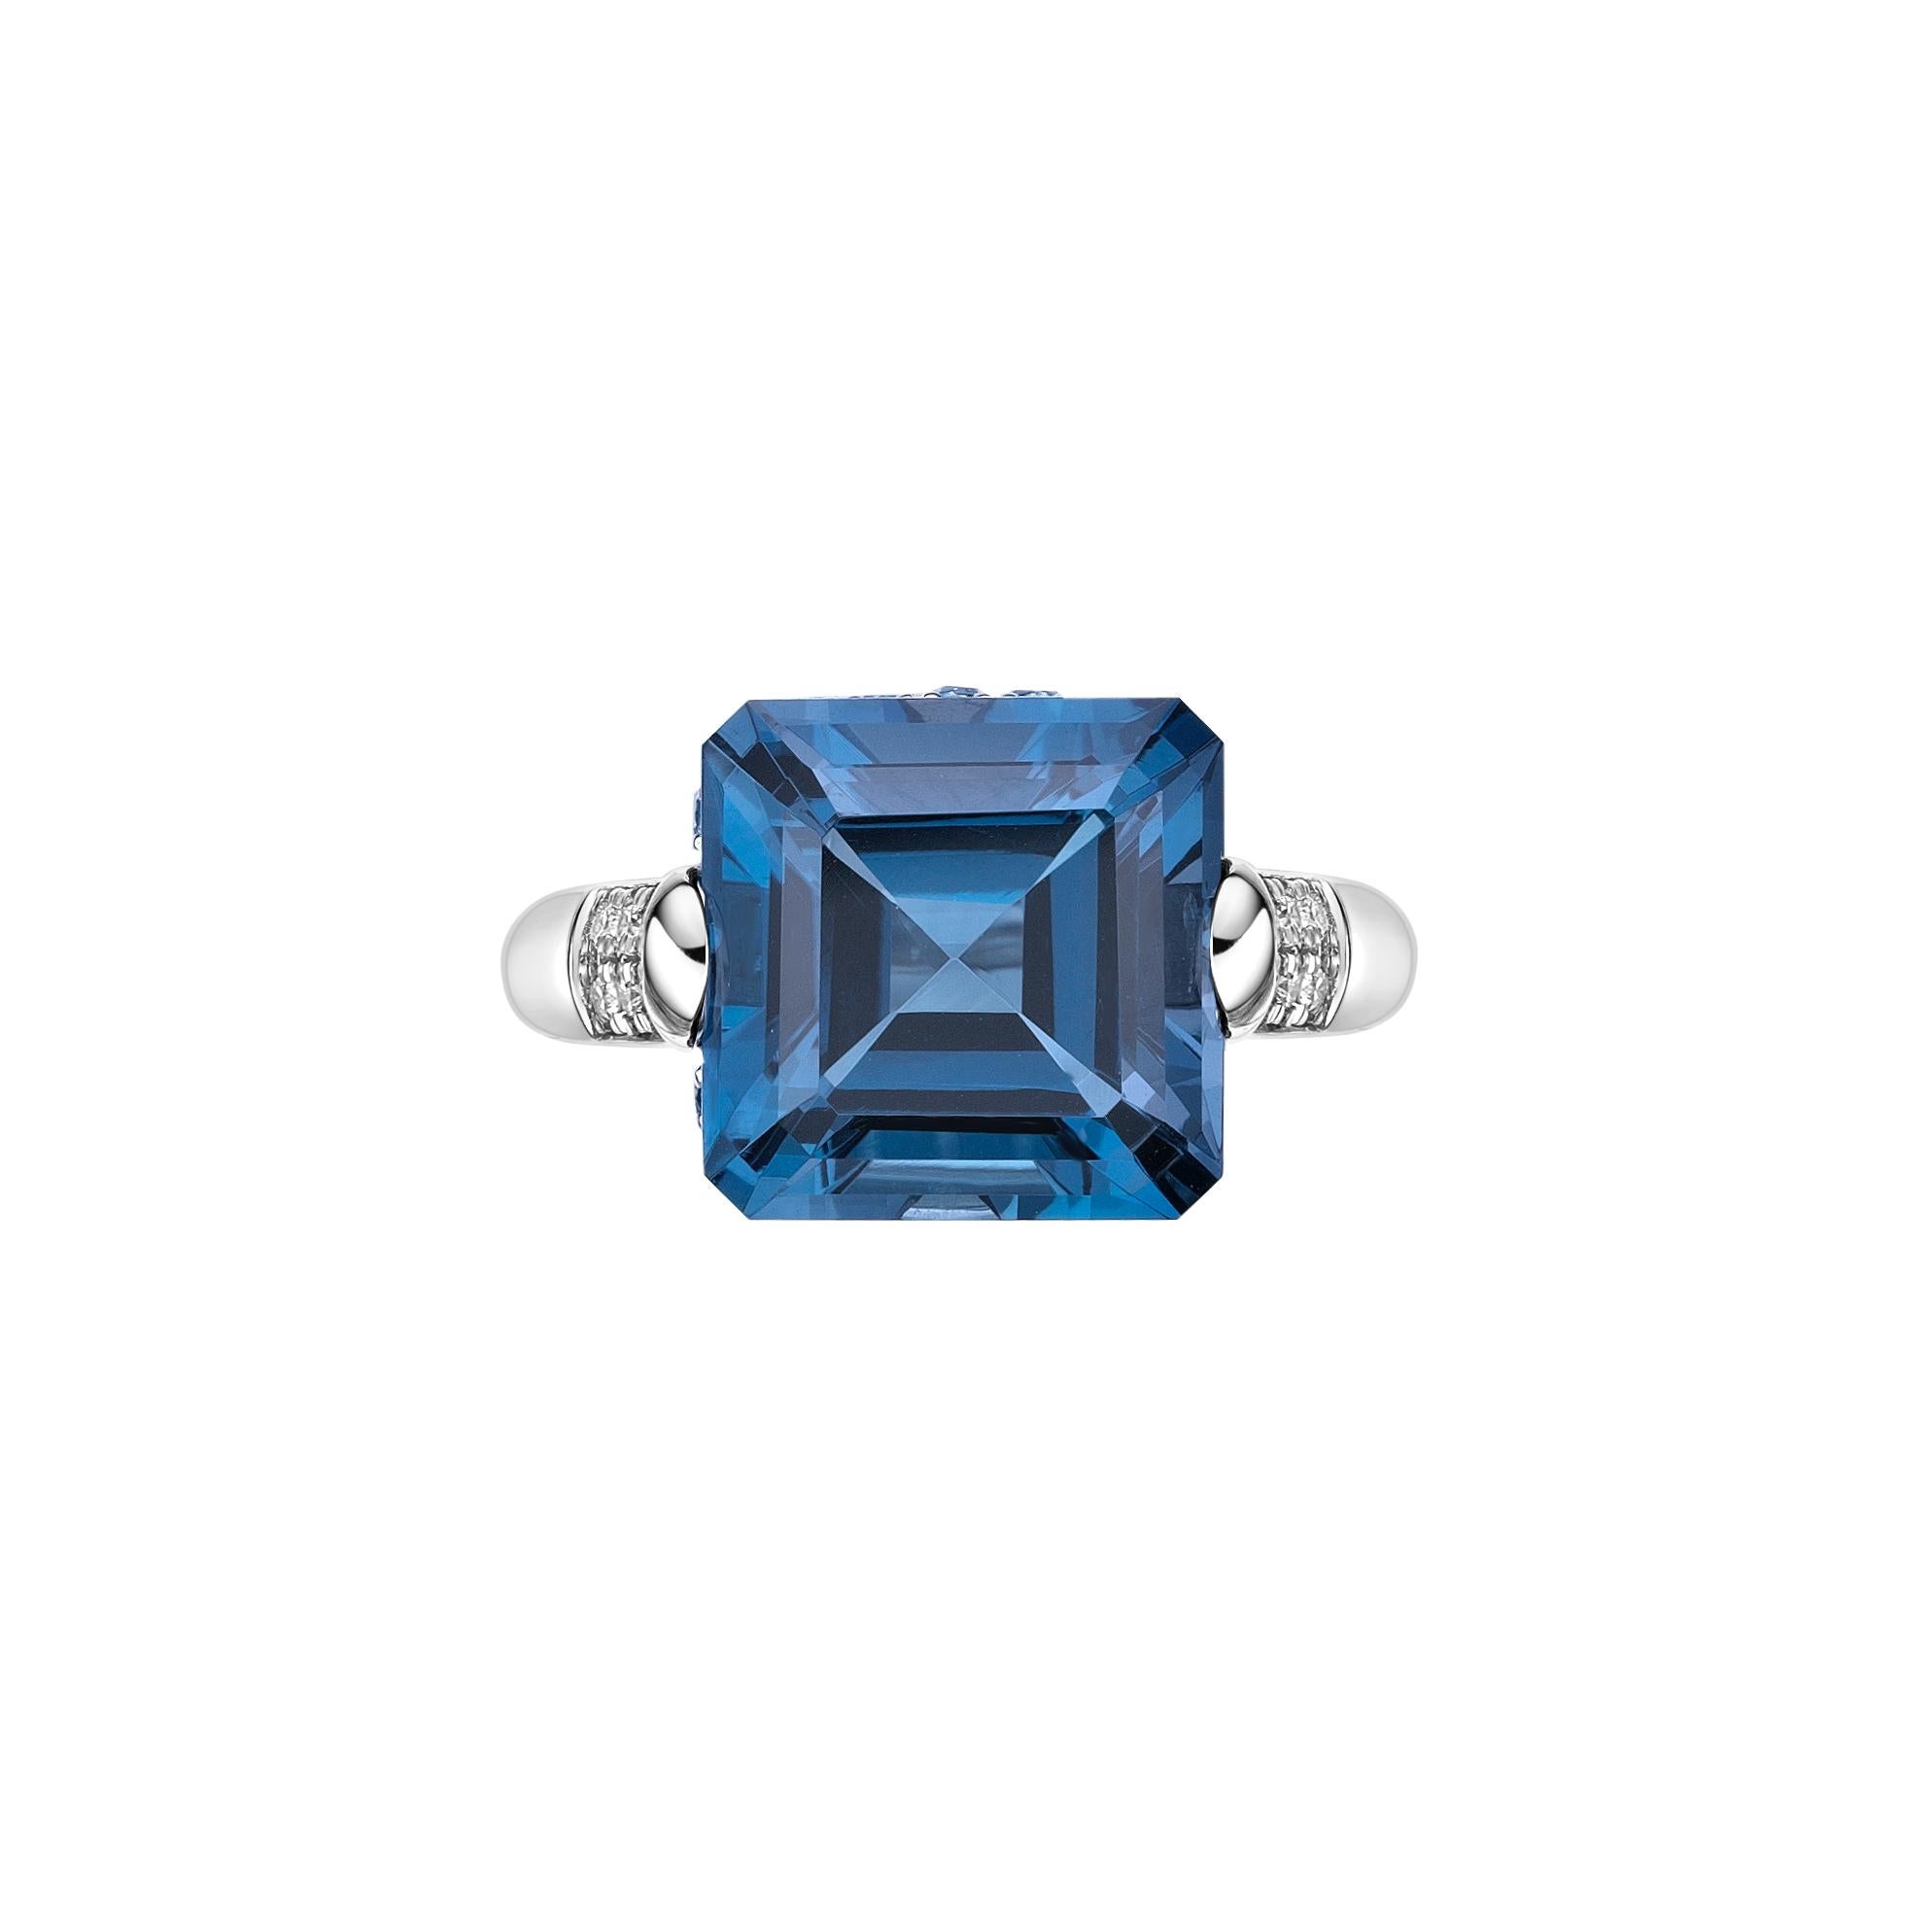 This is fancy London Blue Topaz Ring in Octagon shape purple hue. The Ring is elegant and can be worn for many occasions. The London Blue Topaz around the ring add to the beauty and elegance of the ring.
  
London Blue Topaz Fancy Ring in 18Karat